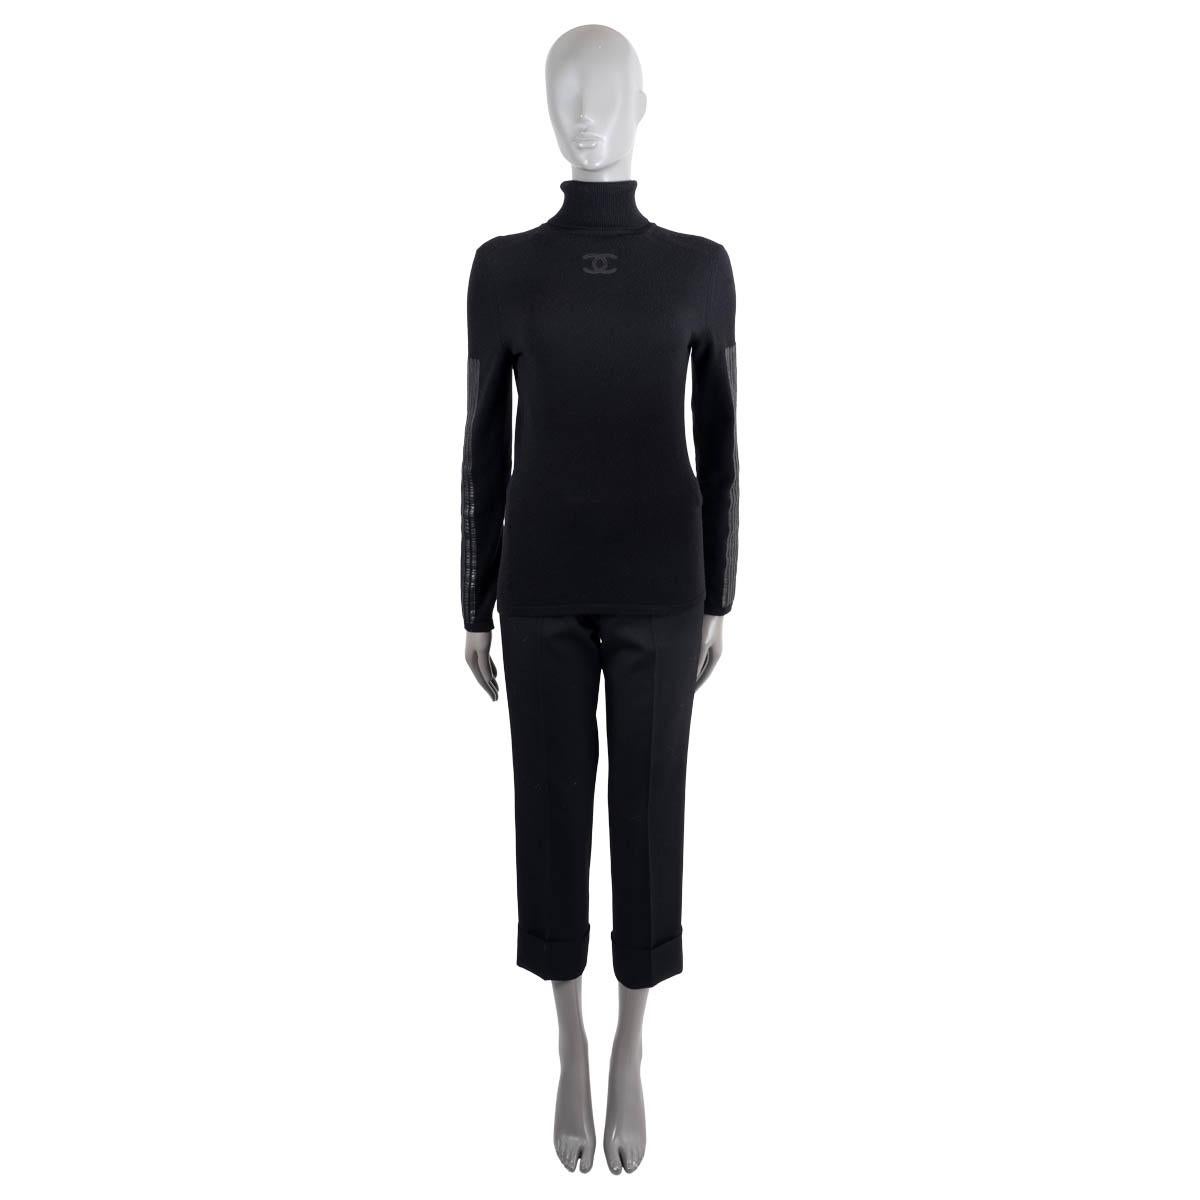 100% authentic Chanel turtleneck sweater in black wool (70%) and cashmere (30%). Features black leather stripes on the sleeves and leather CC on the neck. Has been worn and is in excellent condition. Please note the Chanel label has been removed,